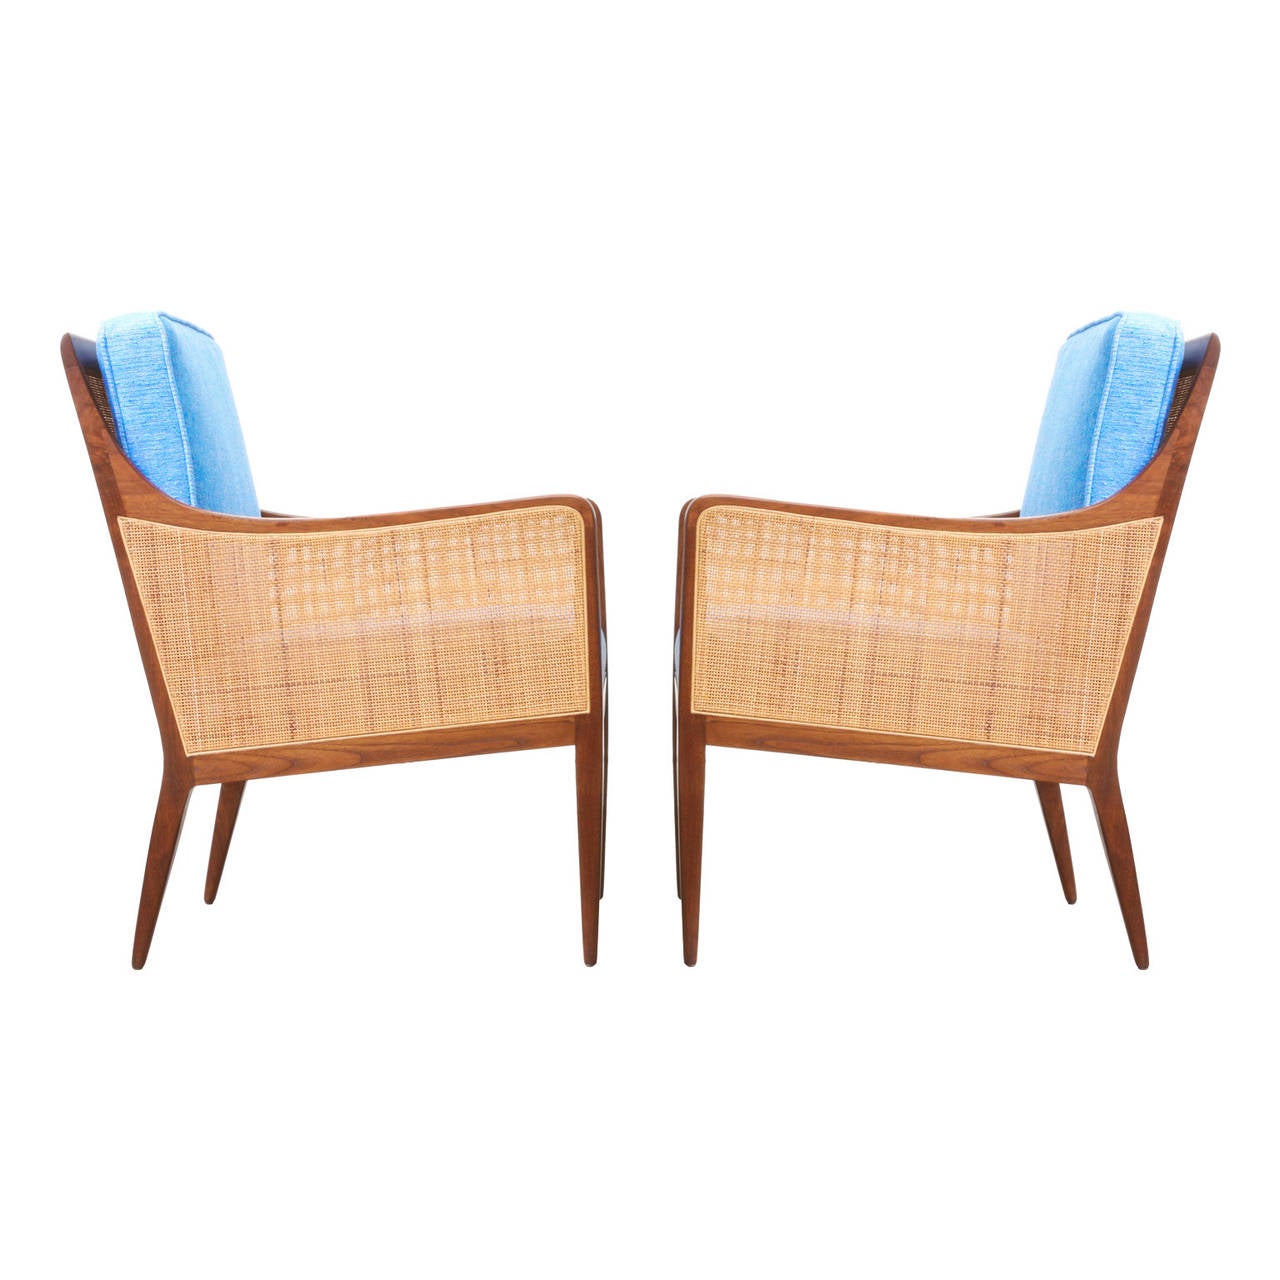 Designer: Kipp Stewart.
Manufacturer: Directional.
Period or style: Mid-Century Modern.
Country: United States.
Date: 1950s.

Dimensions: 32.75″ H x 23.75″ W x 25.5″ D.
Seat height: 17.5″.
Materials: Walnut, cane.
Condition: Excellent,